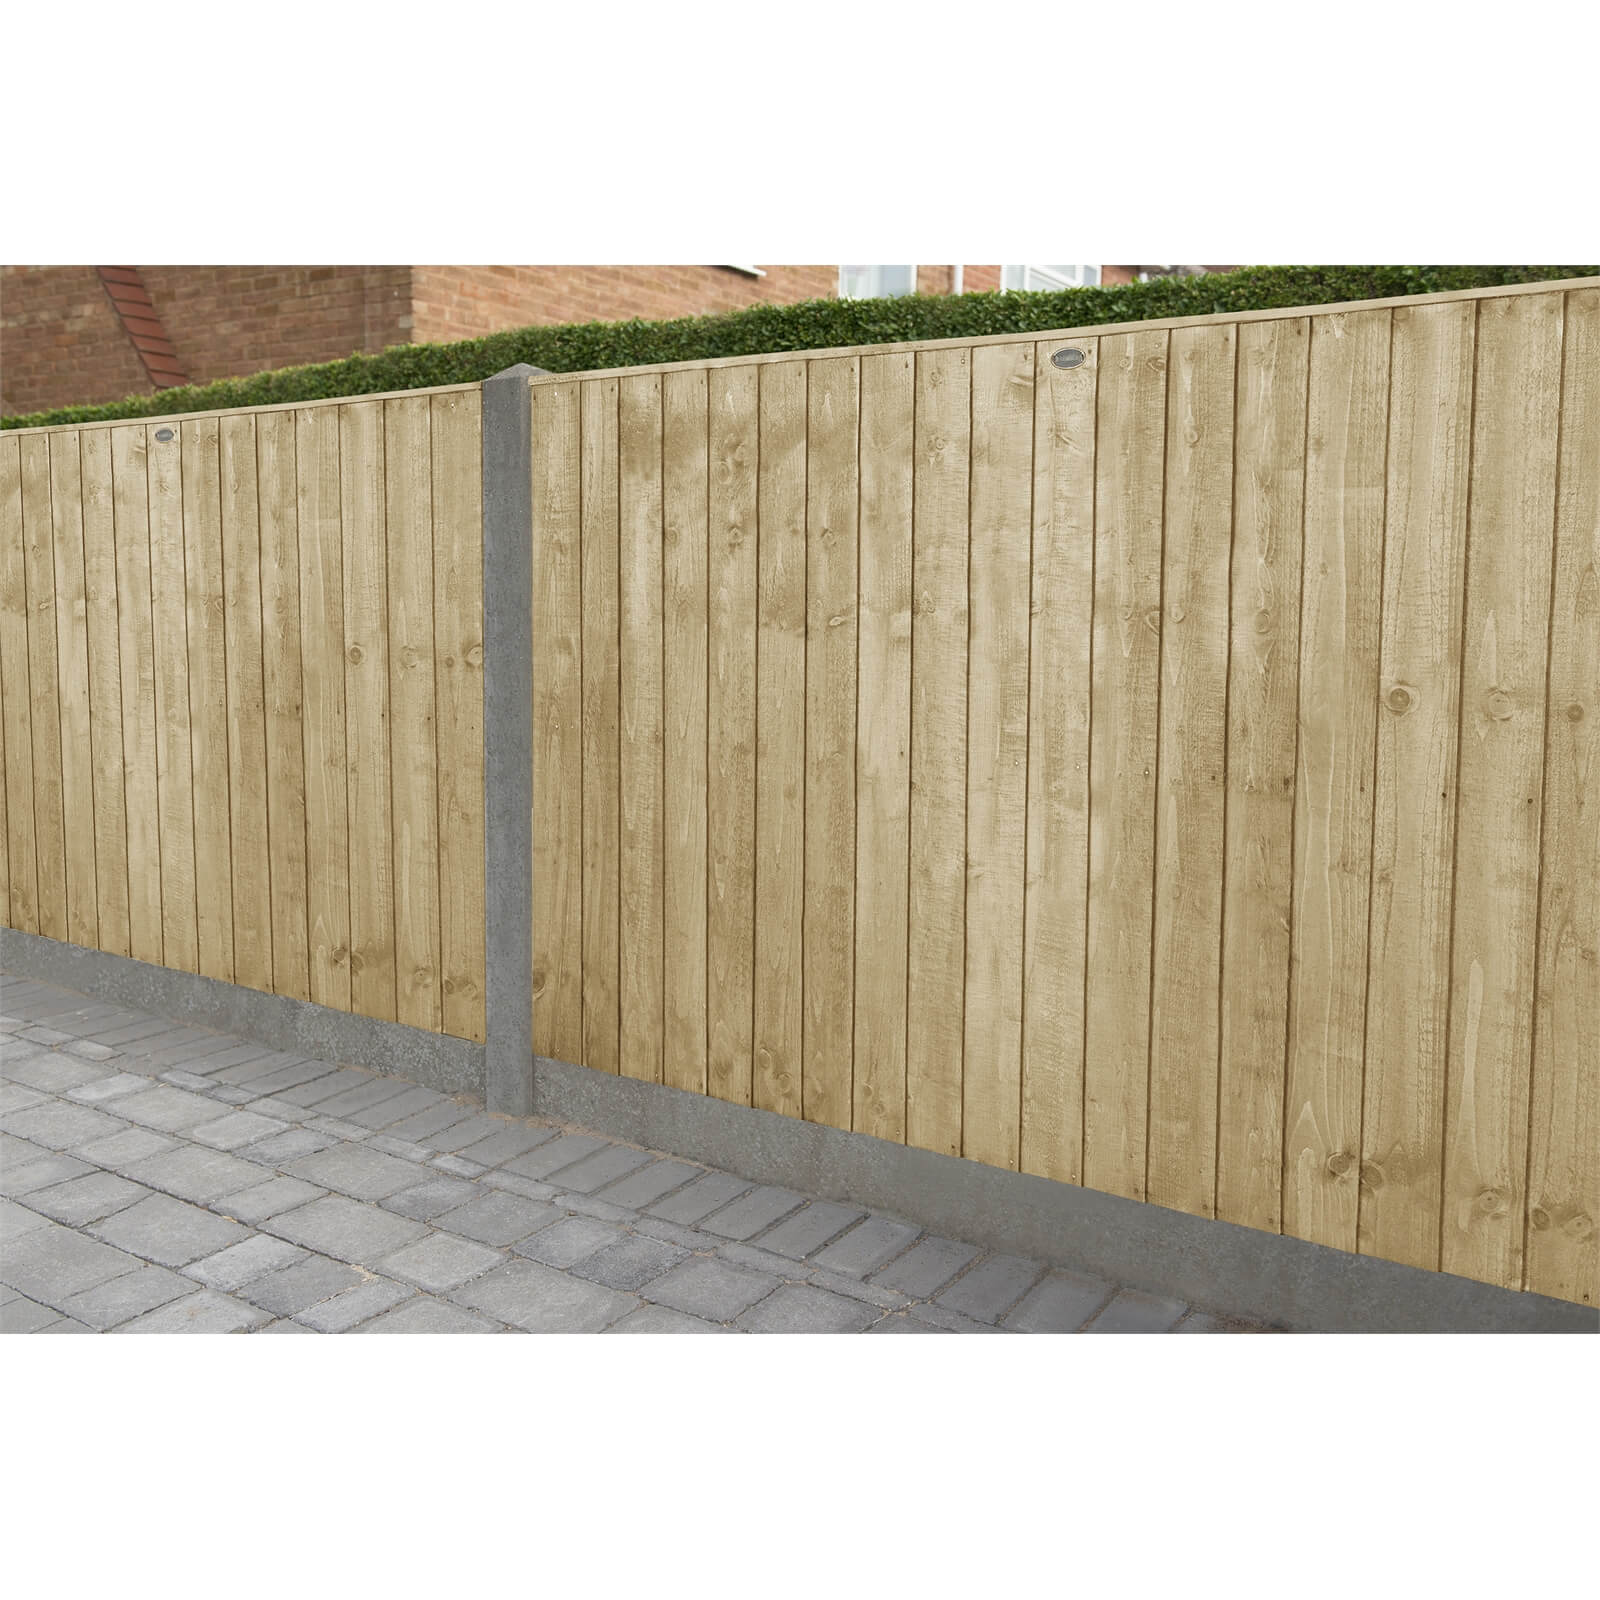 6ft x 4ft (1.83m x 1.23m) Pressure Treated Featheredge Fence Panel - Pack of 3